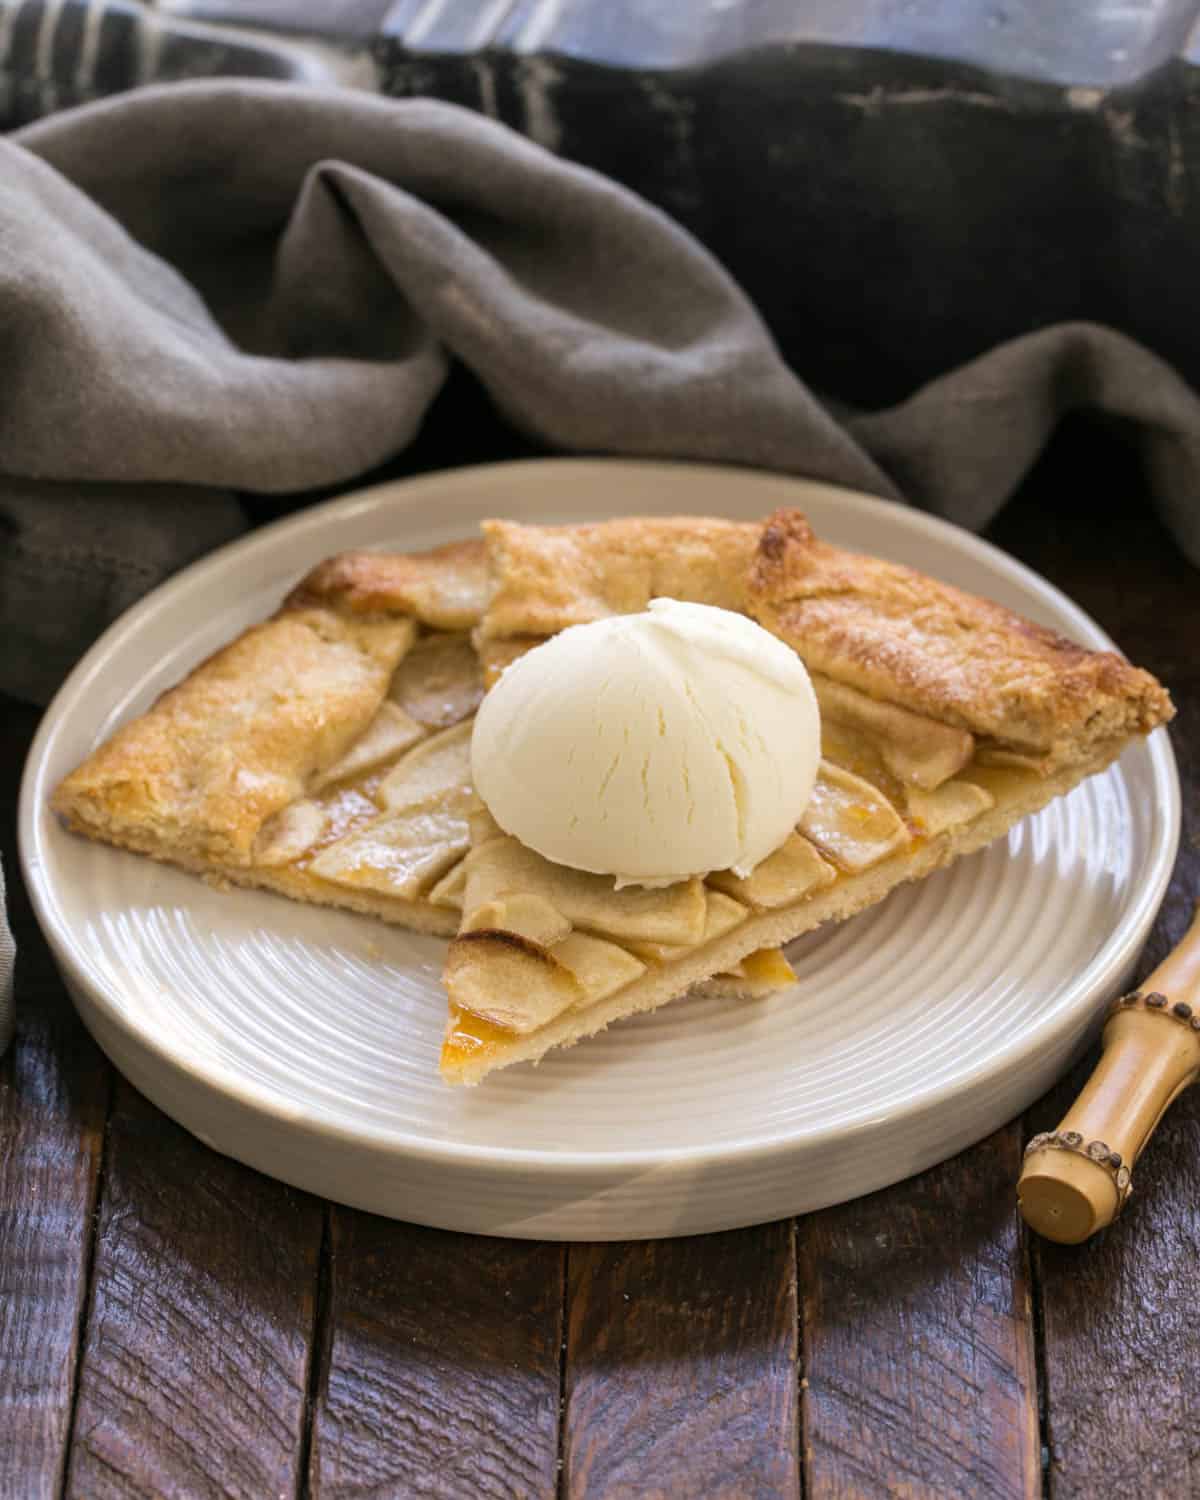 Two slices of Apple Tart on a white plate with a scoop of ice cream.